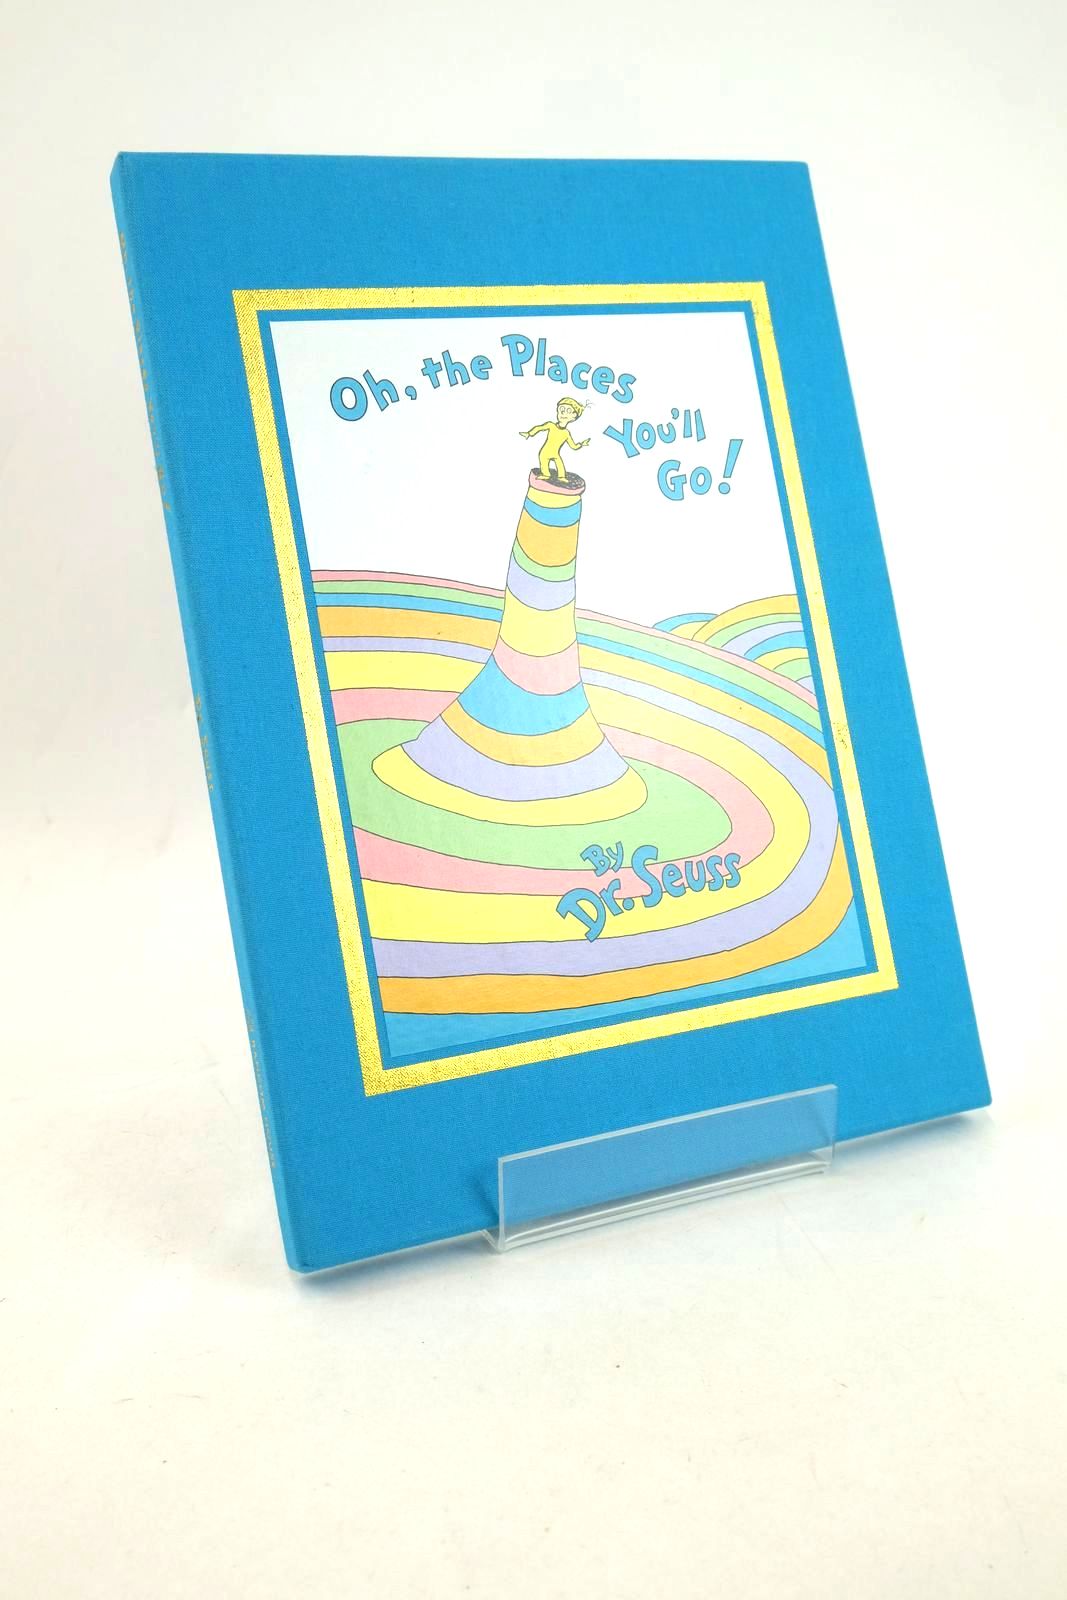 Photo of OH, THE PLACES YOU'LL GO! written by Seuss, Dr. illustrated by Seuss, Dr. published by Random House Children'S Books (STOCK CODE: 1327538)  for sale by Stella & Rose's Books